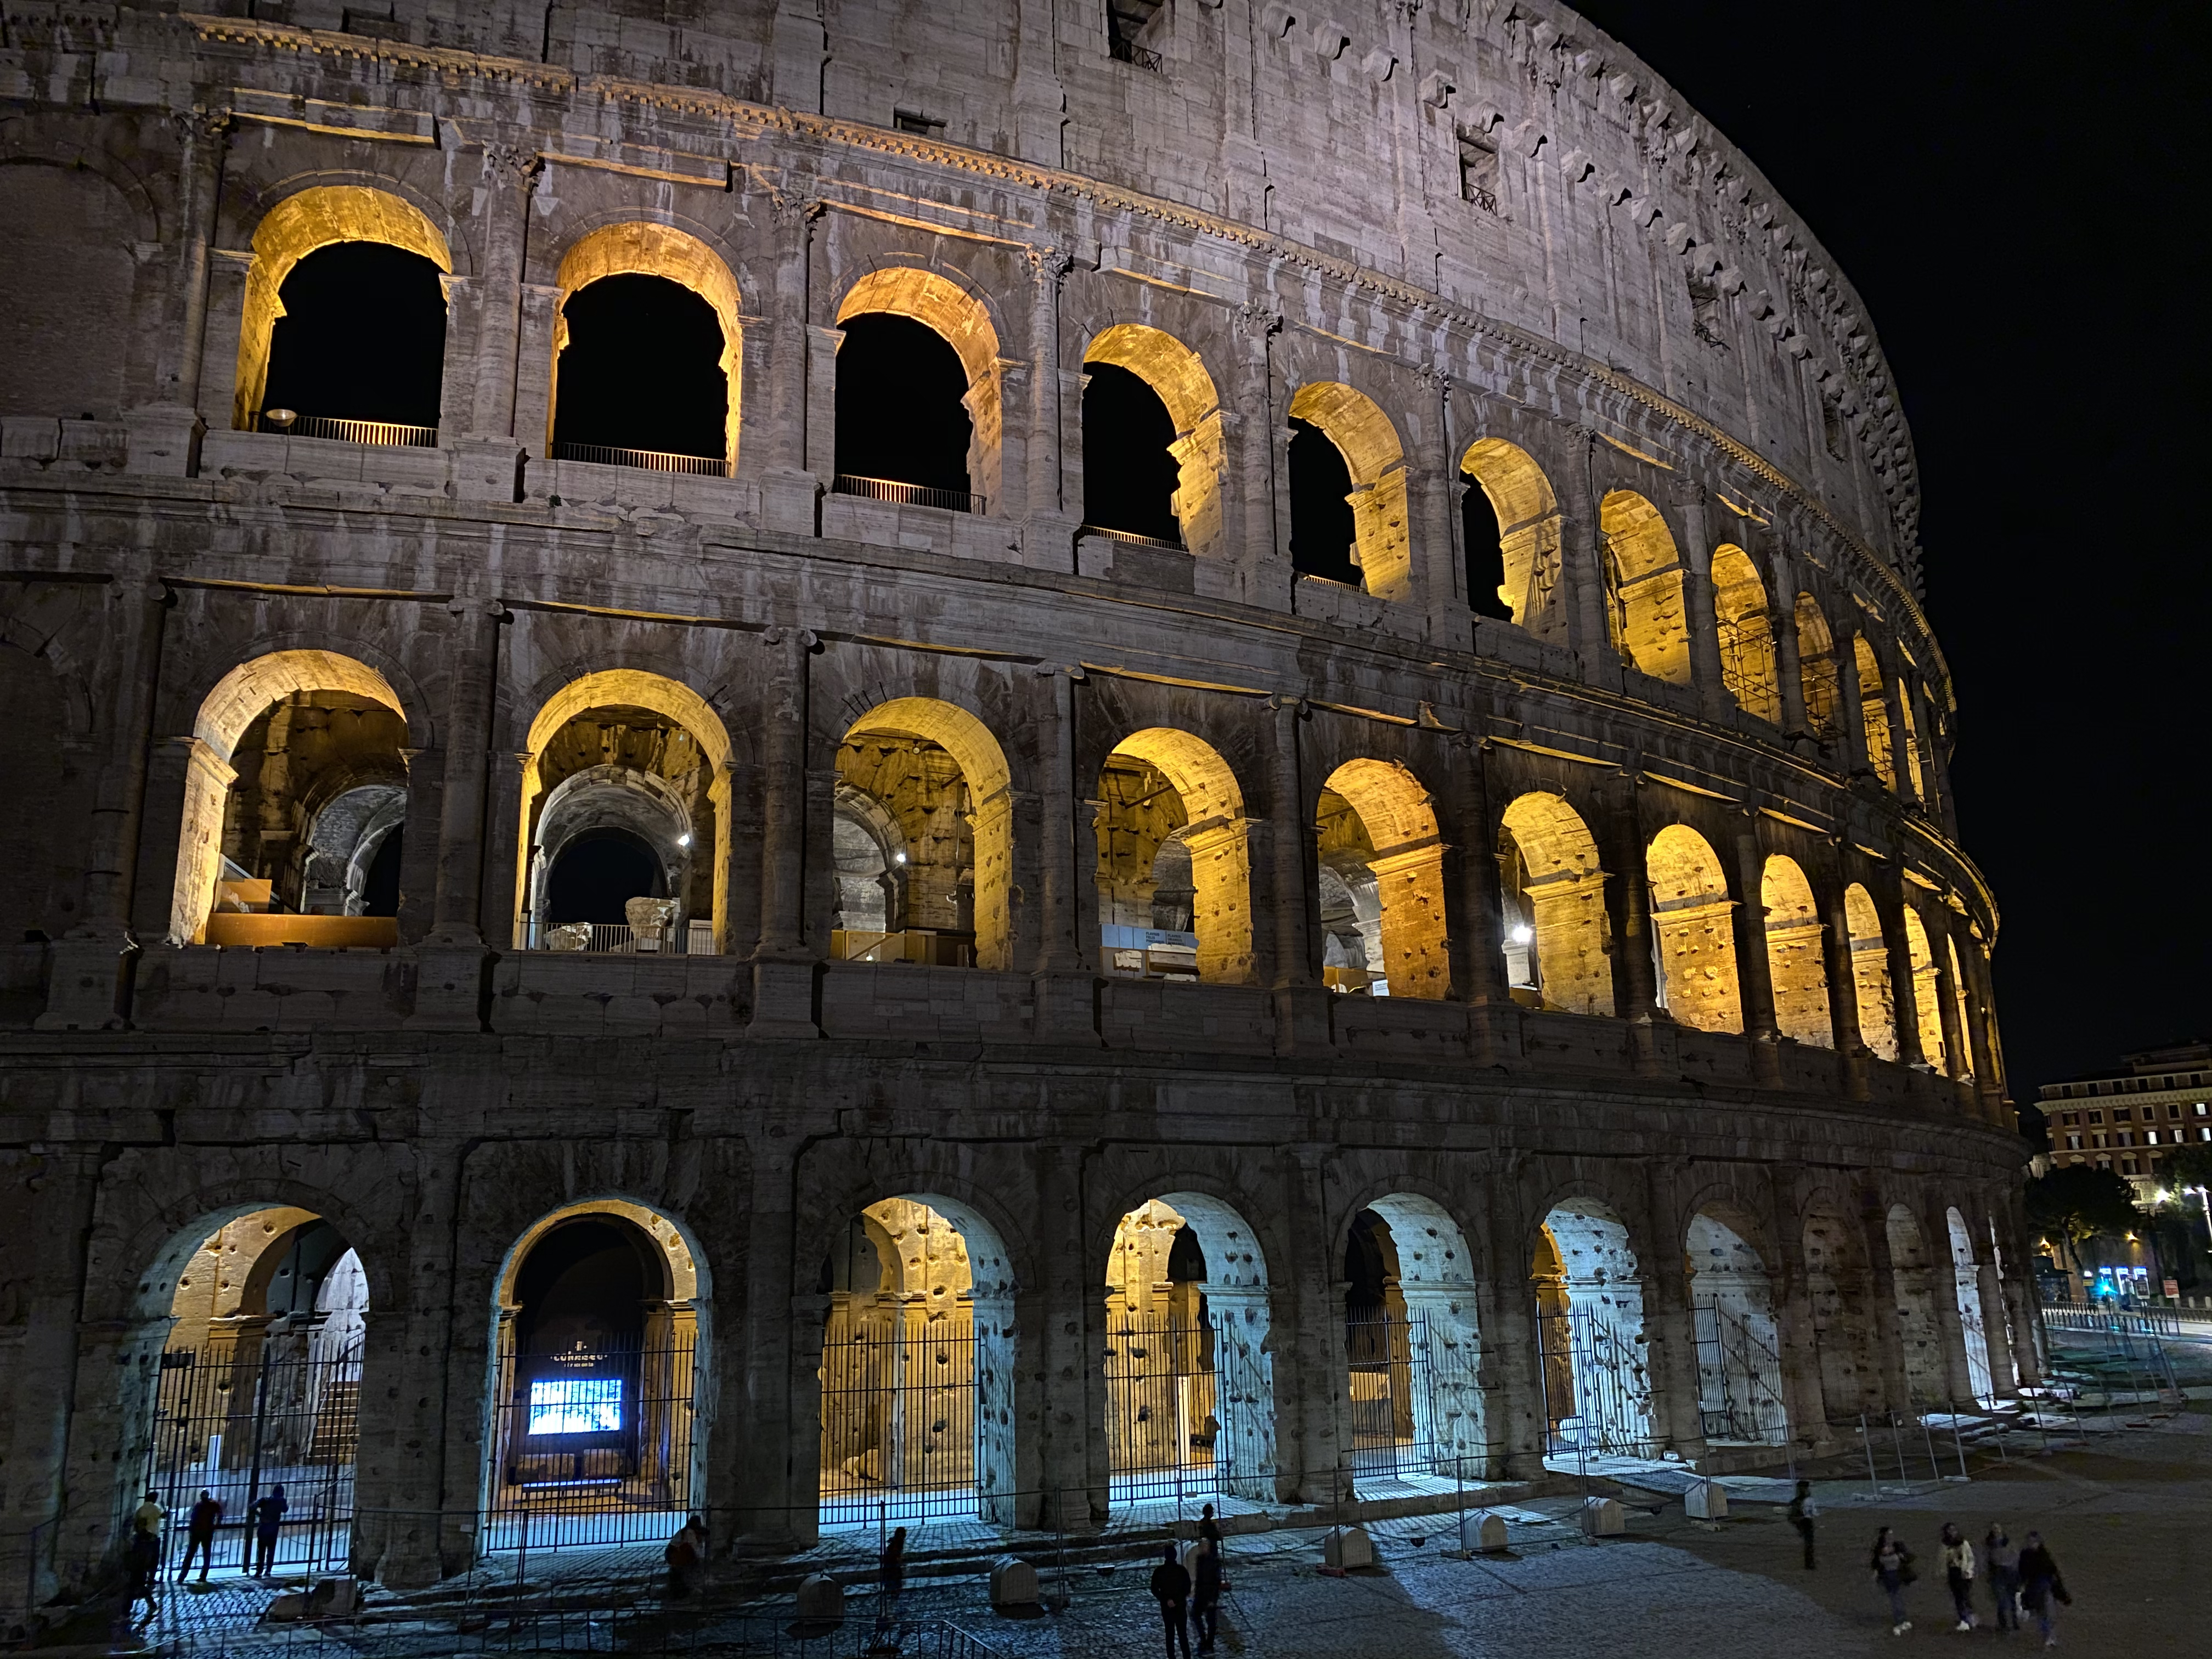 The Colosseum at night. Shot on iPhone 11 Pro using the wide lens, with night mode enabled. Unedited. Zoom in for details.